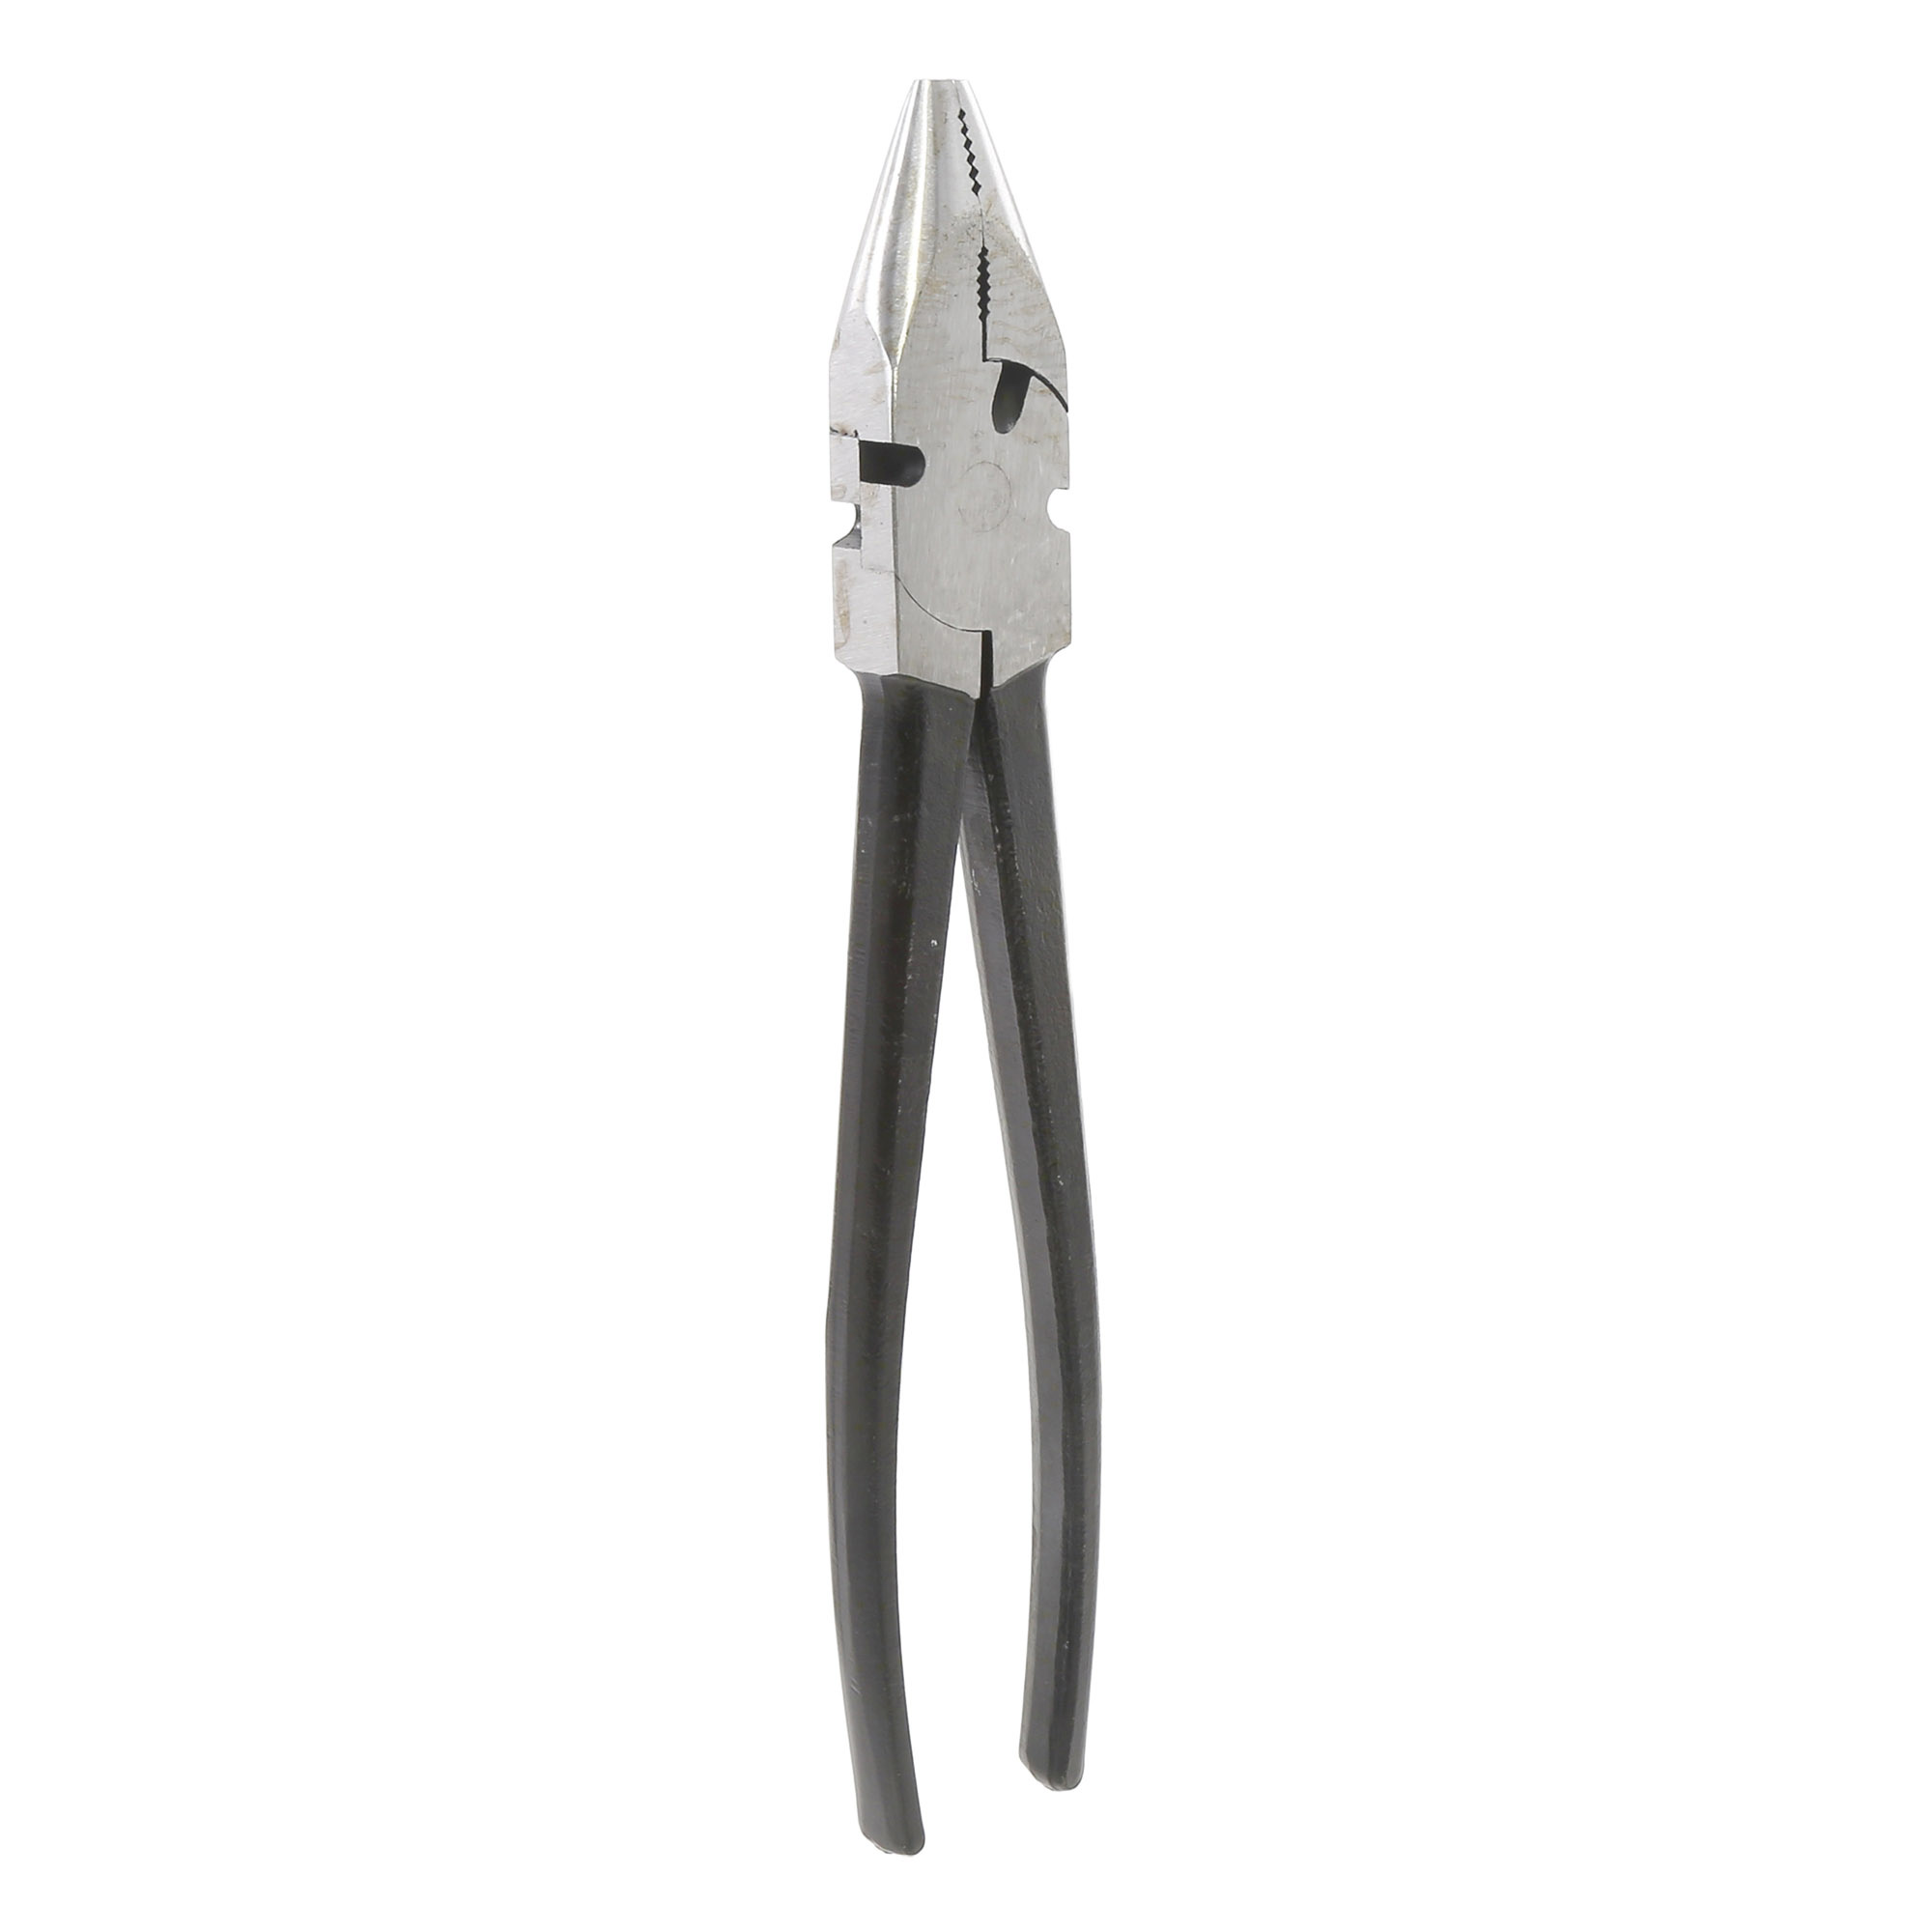 Chain Link Fence Pliers